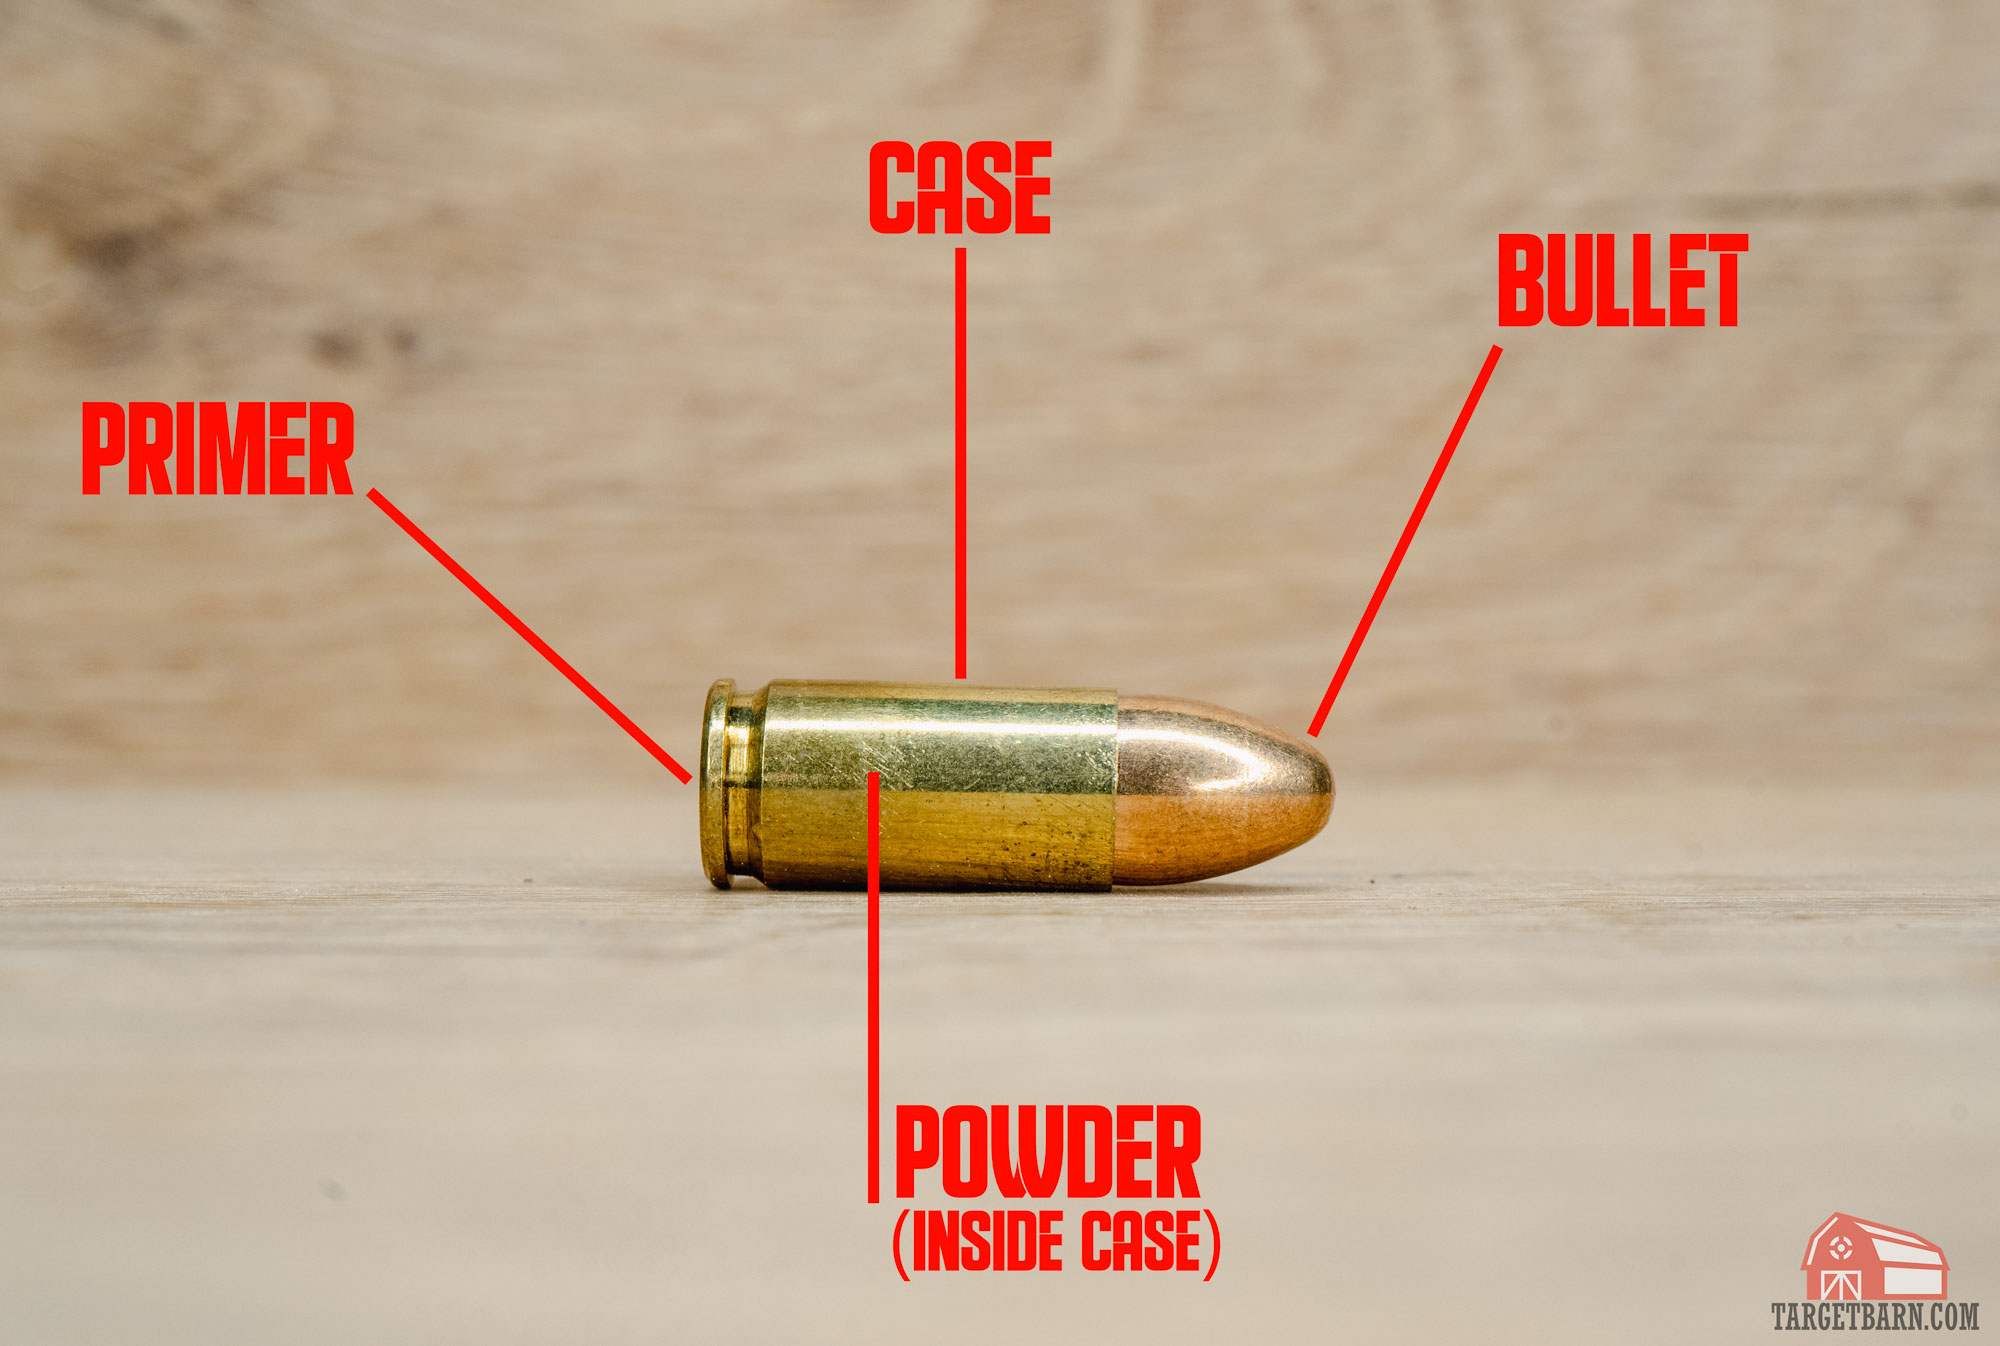 a diagram of the basic parts of ammunition, showing the primer, case, bullet, and powder